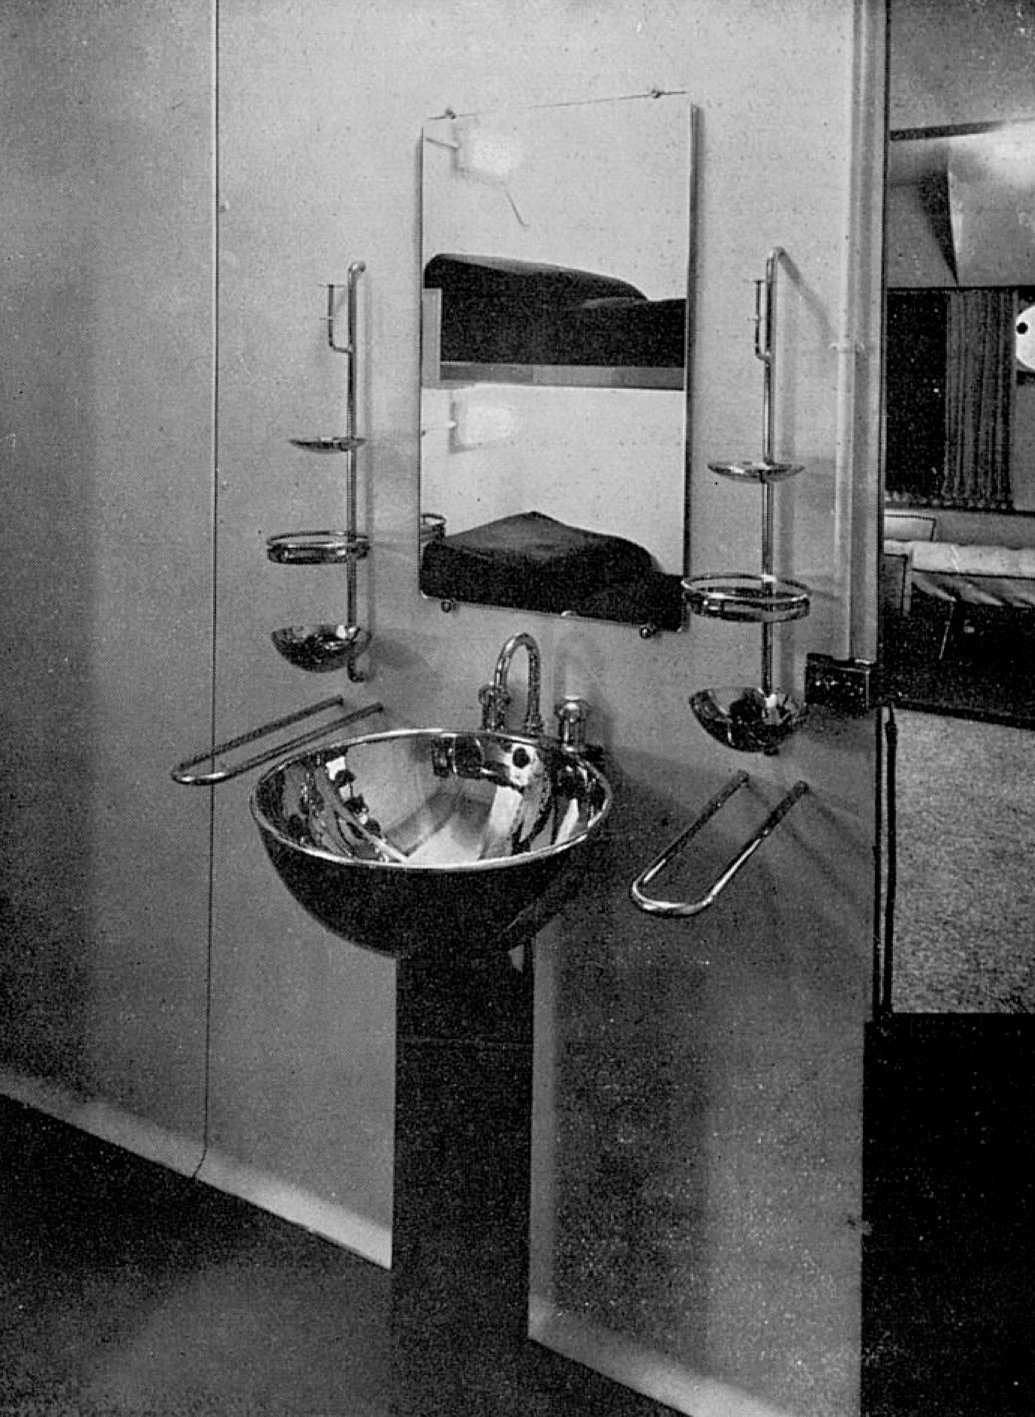 Prototype of a stainless steel houseboat cabin presented by the Ateliers Jean Prouvé (with M. Gascoin, interior design) at the Salon d’automne, Paris, 1934 (section organized by the OTUA and the UAM).